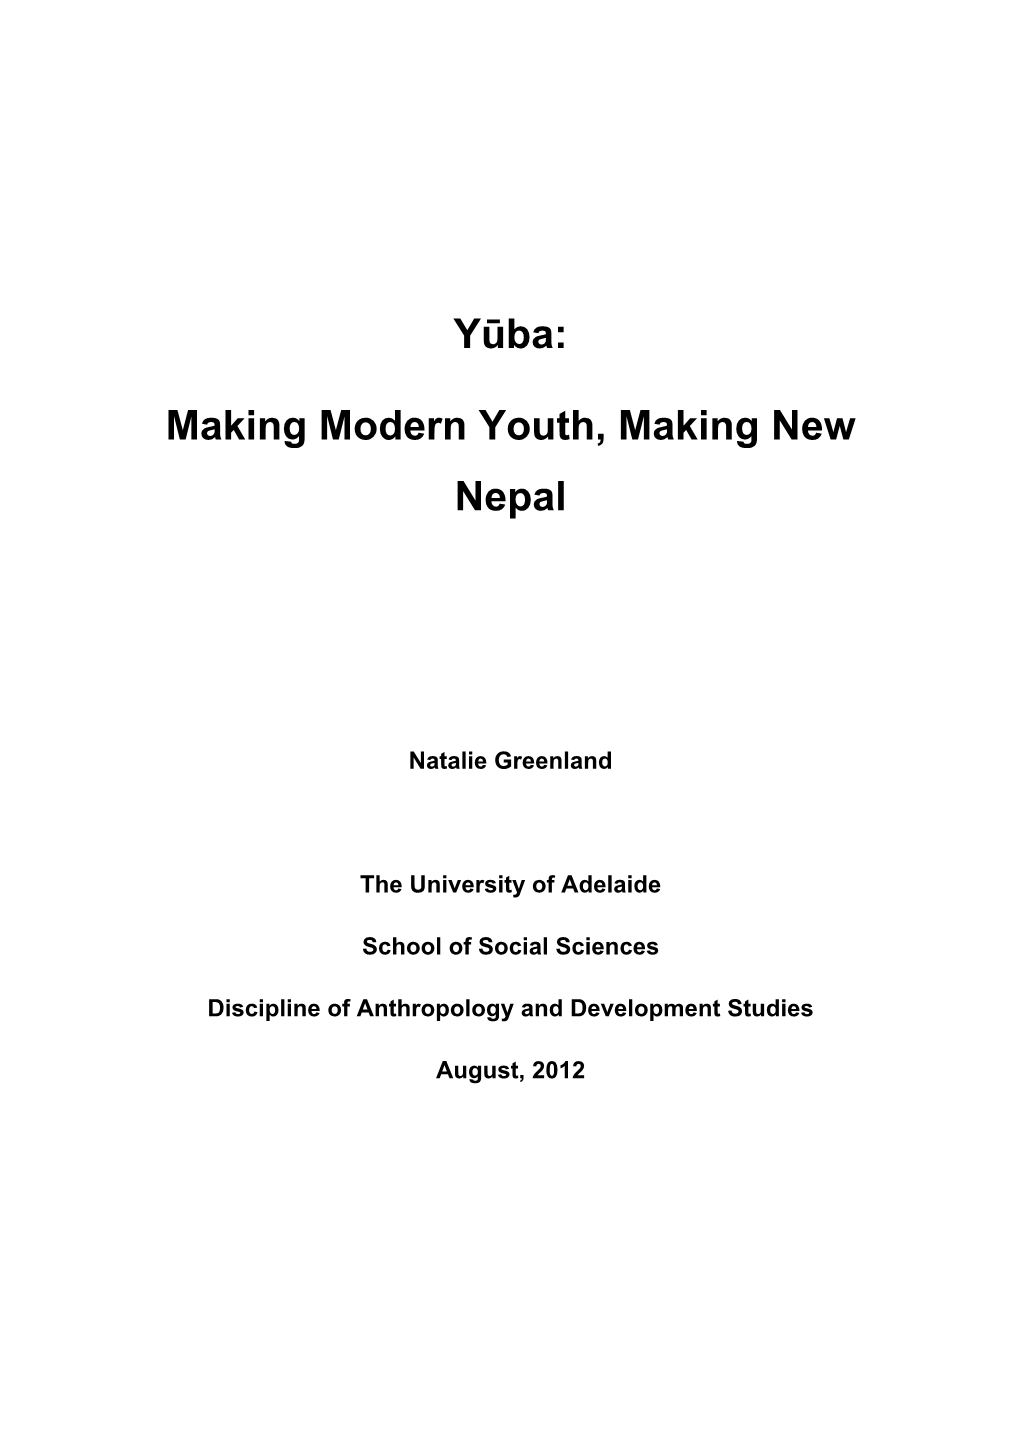 Yuba, Hamro Pusta: Youth and Generational Politics in Nepali Political Culture’, Studies in Nepali History and Society, Vol